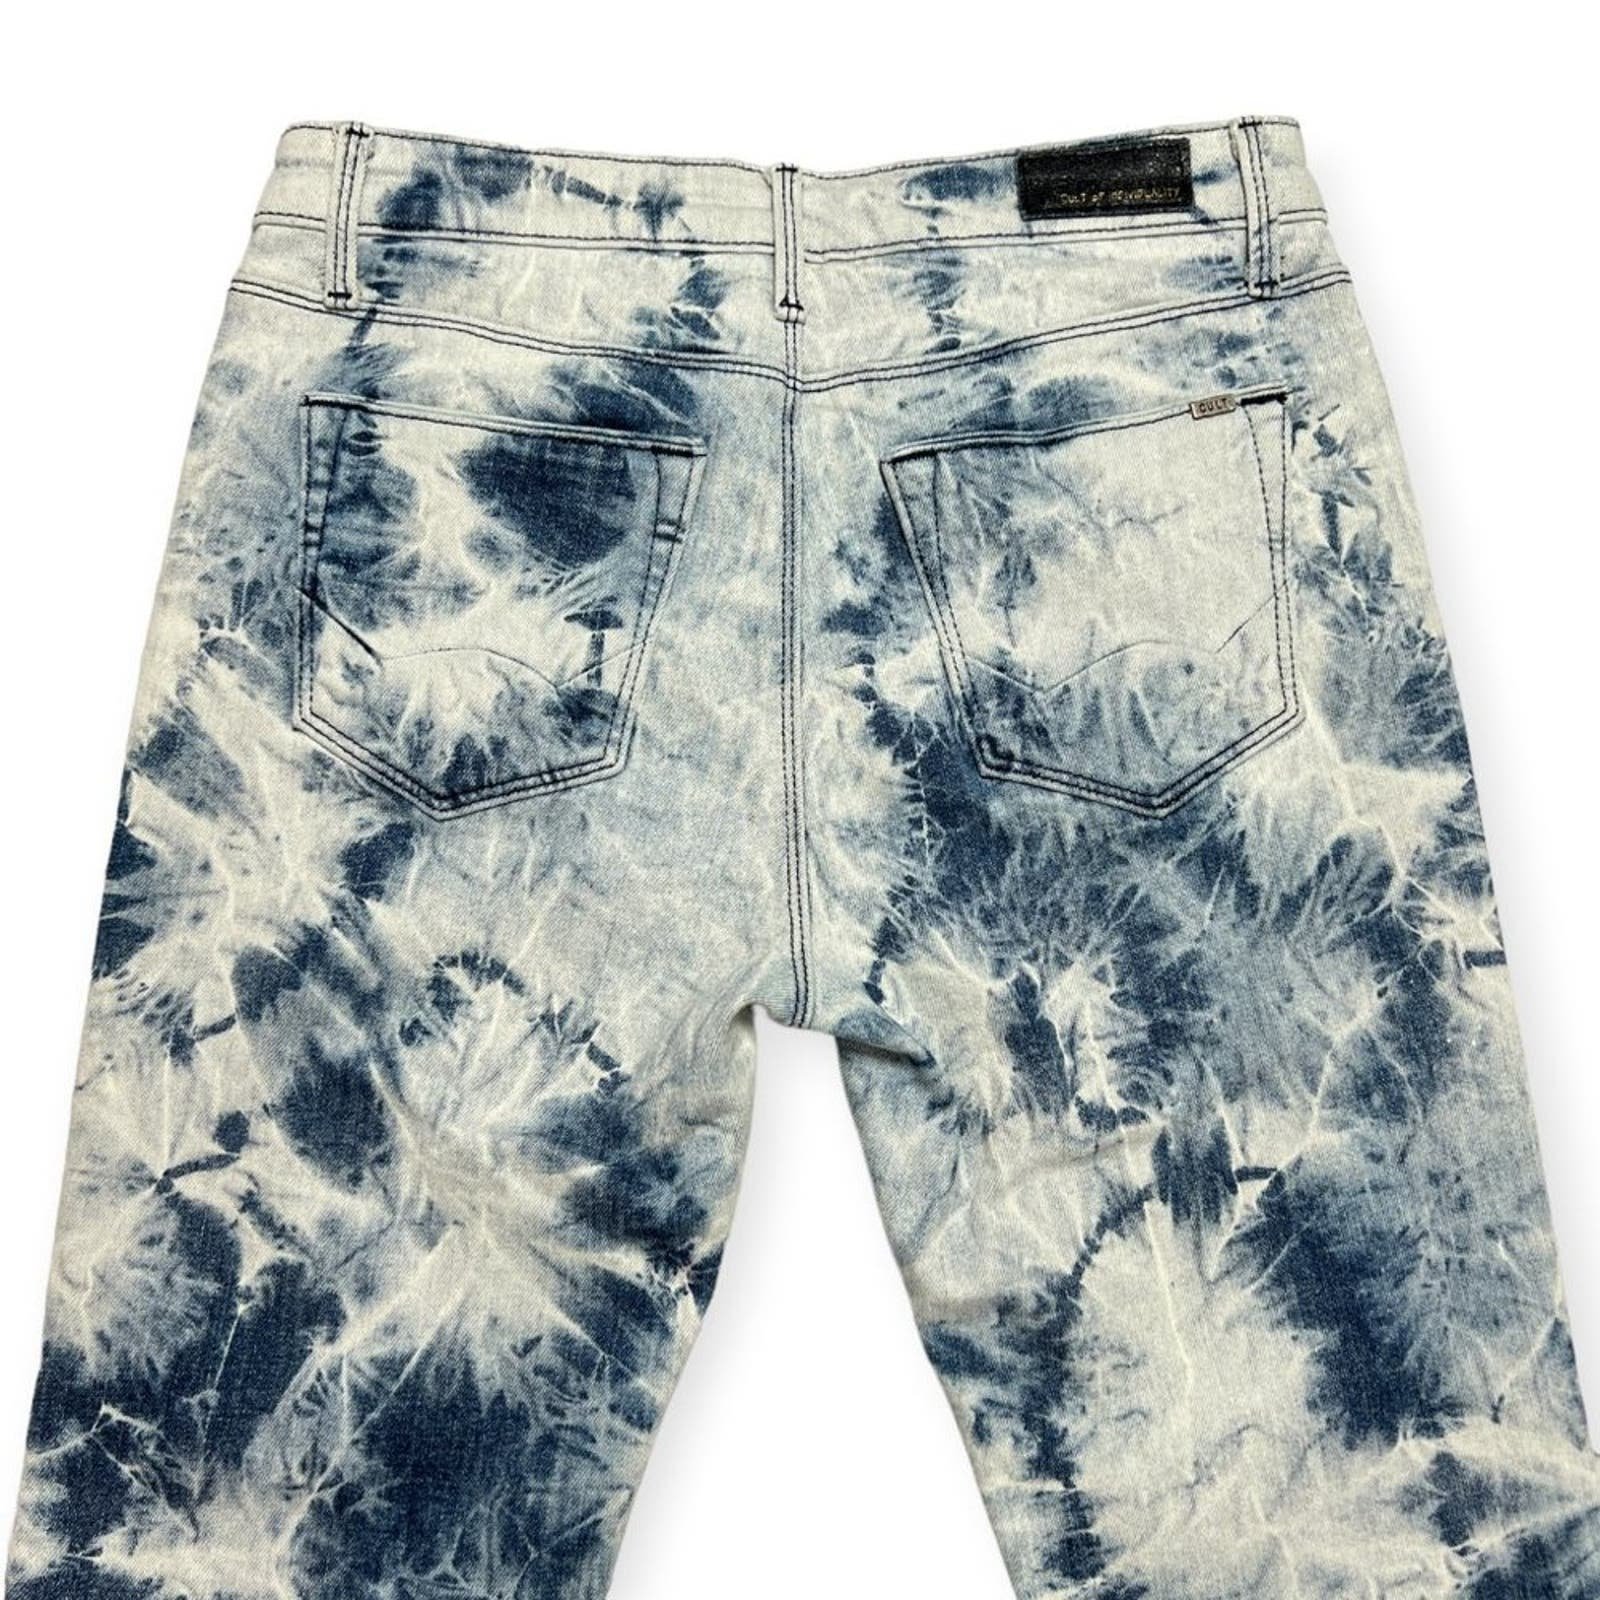 Affordable Cult of Individuality Gypsy High Rise Jeans Womens 25 Skinny Tie Dye Blue Denim hkoFqkHMd High Quaity